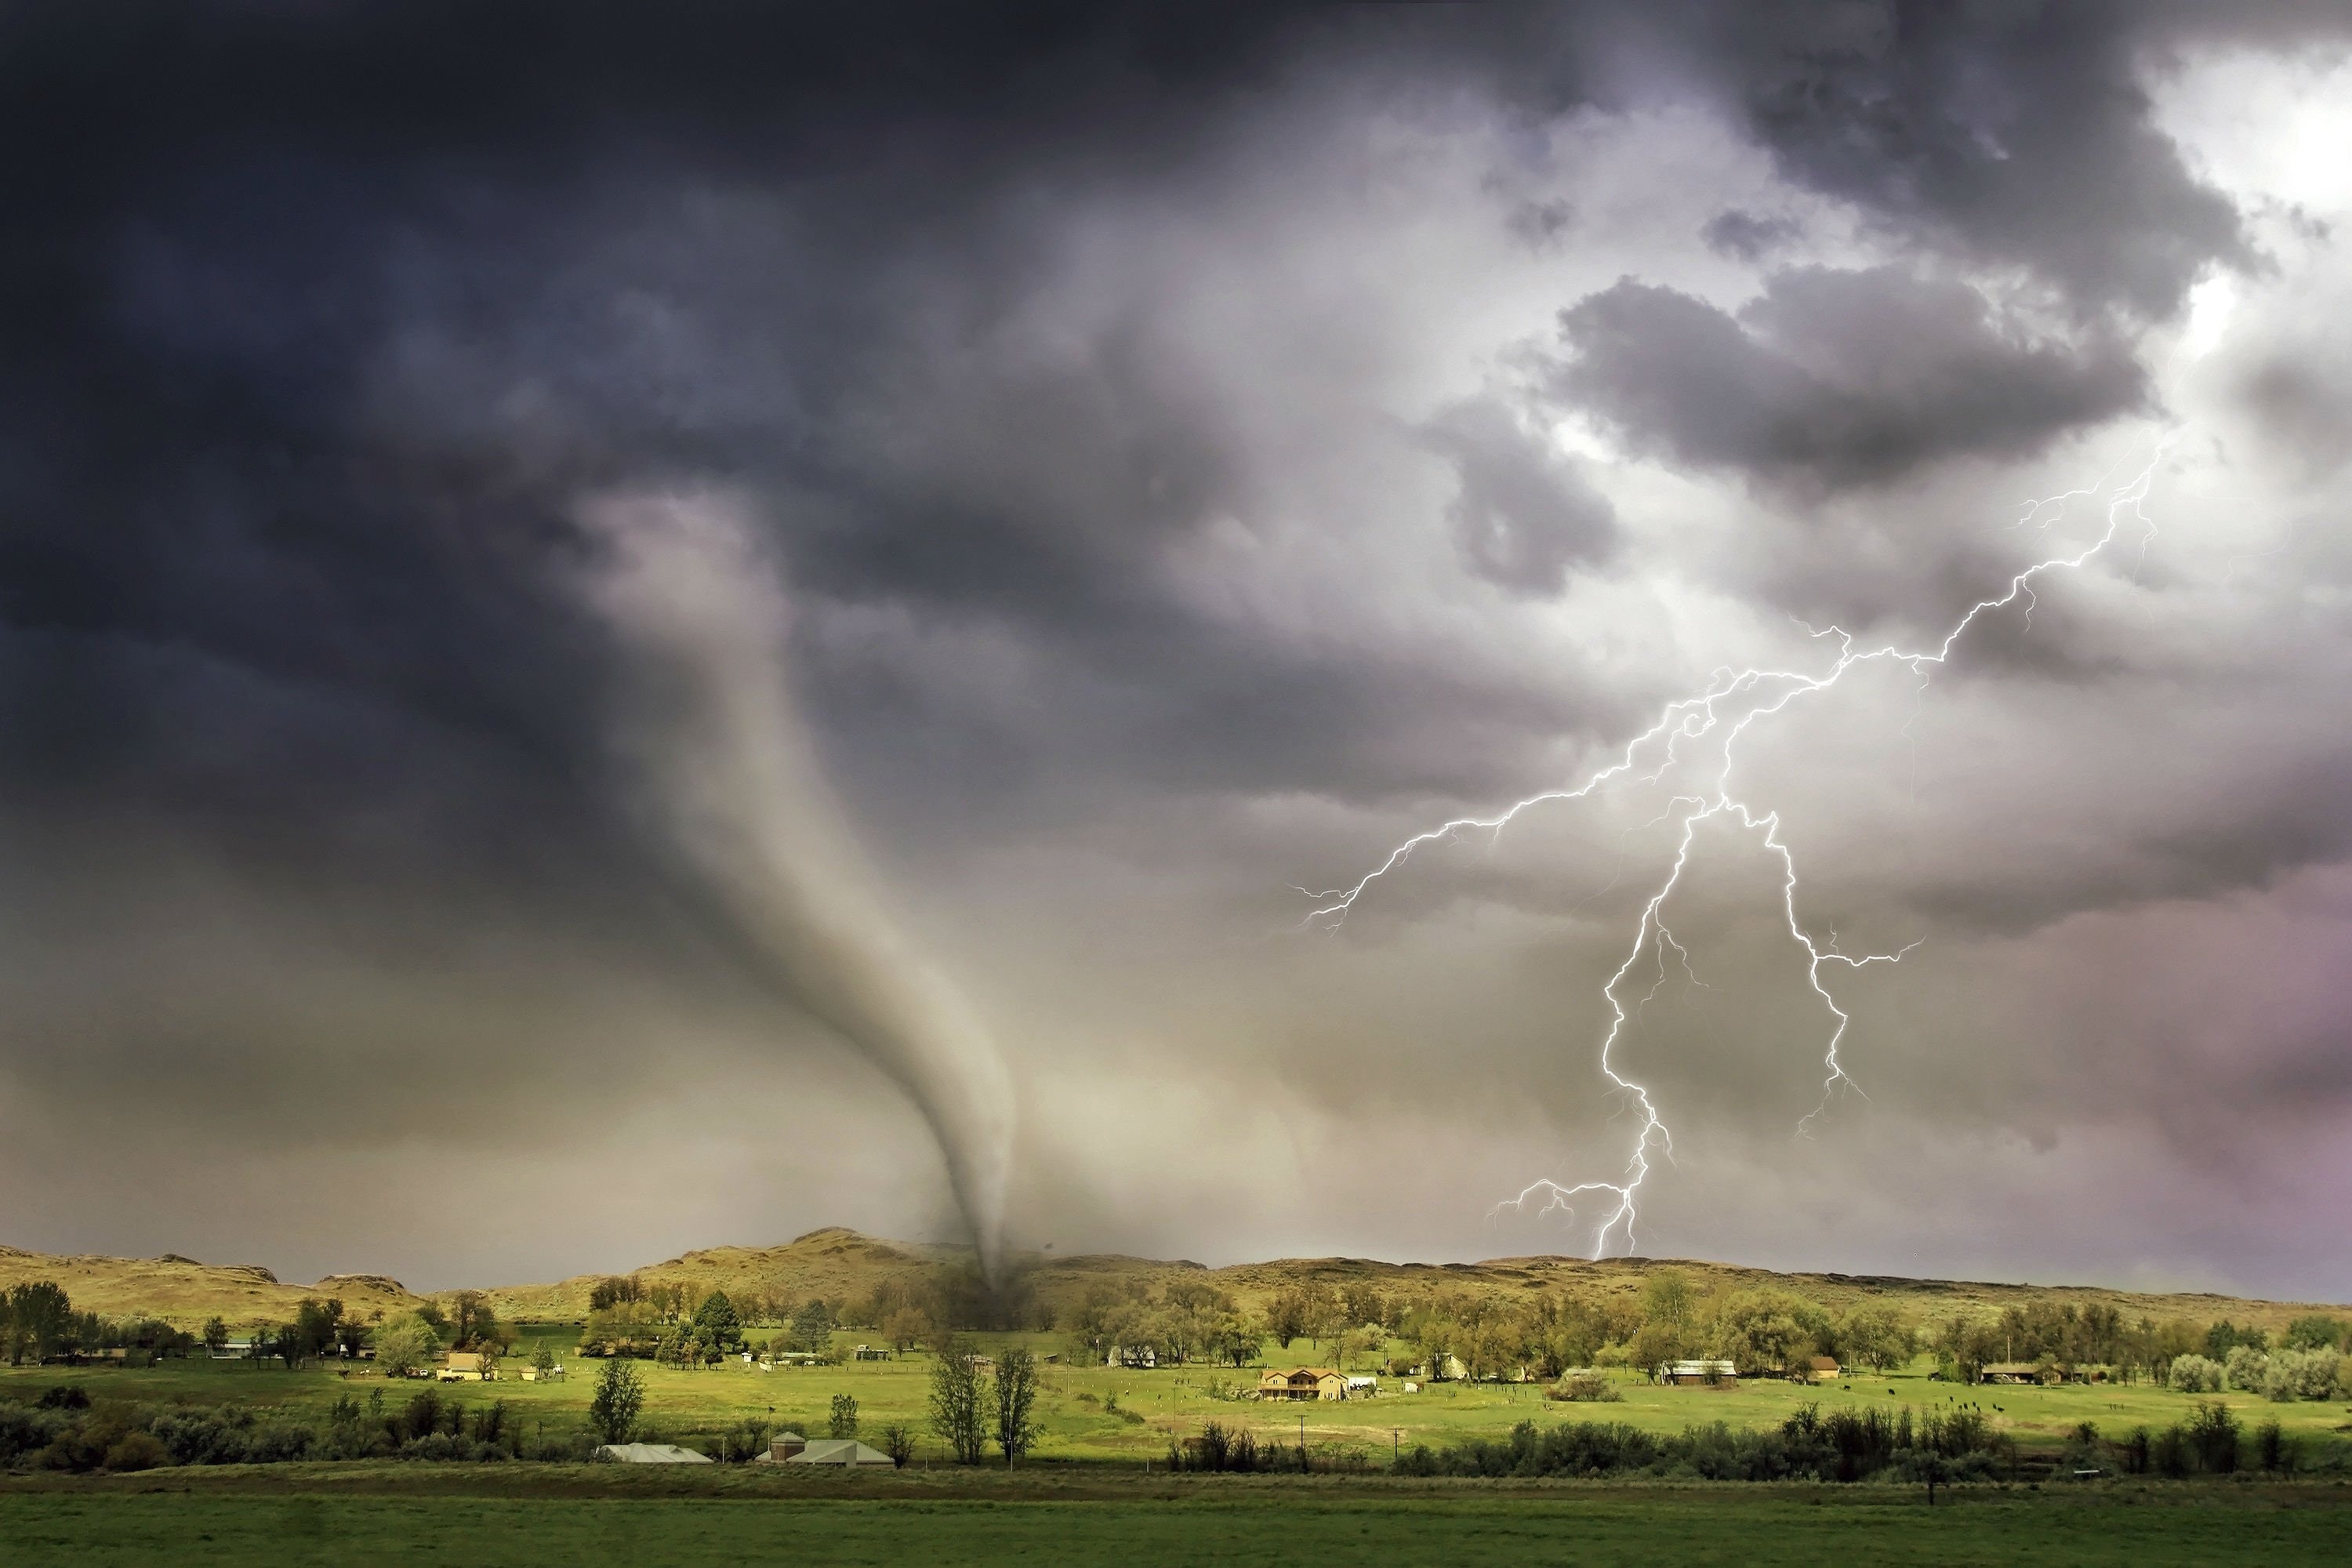 Photo of a tornado and lighting strike in a small village